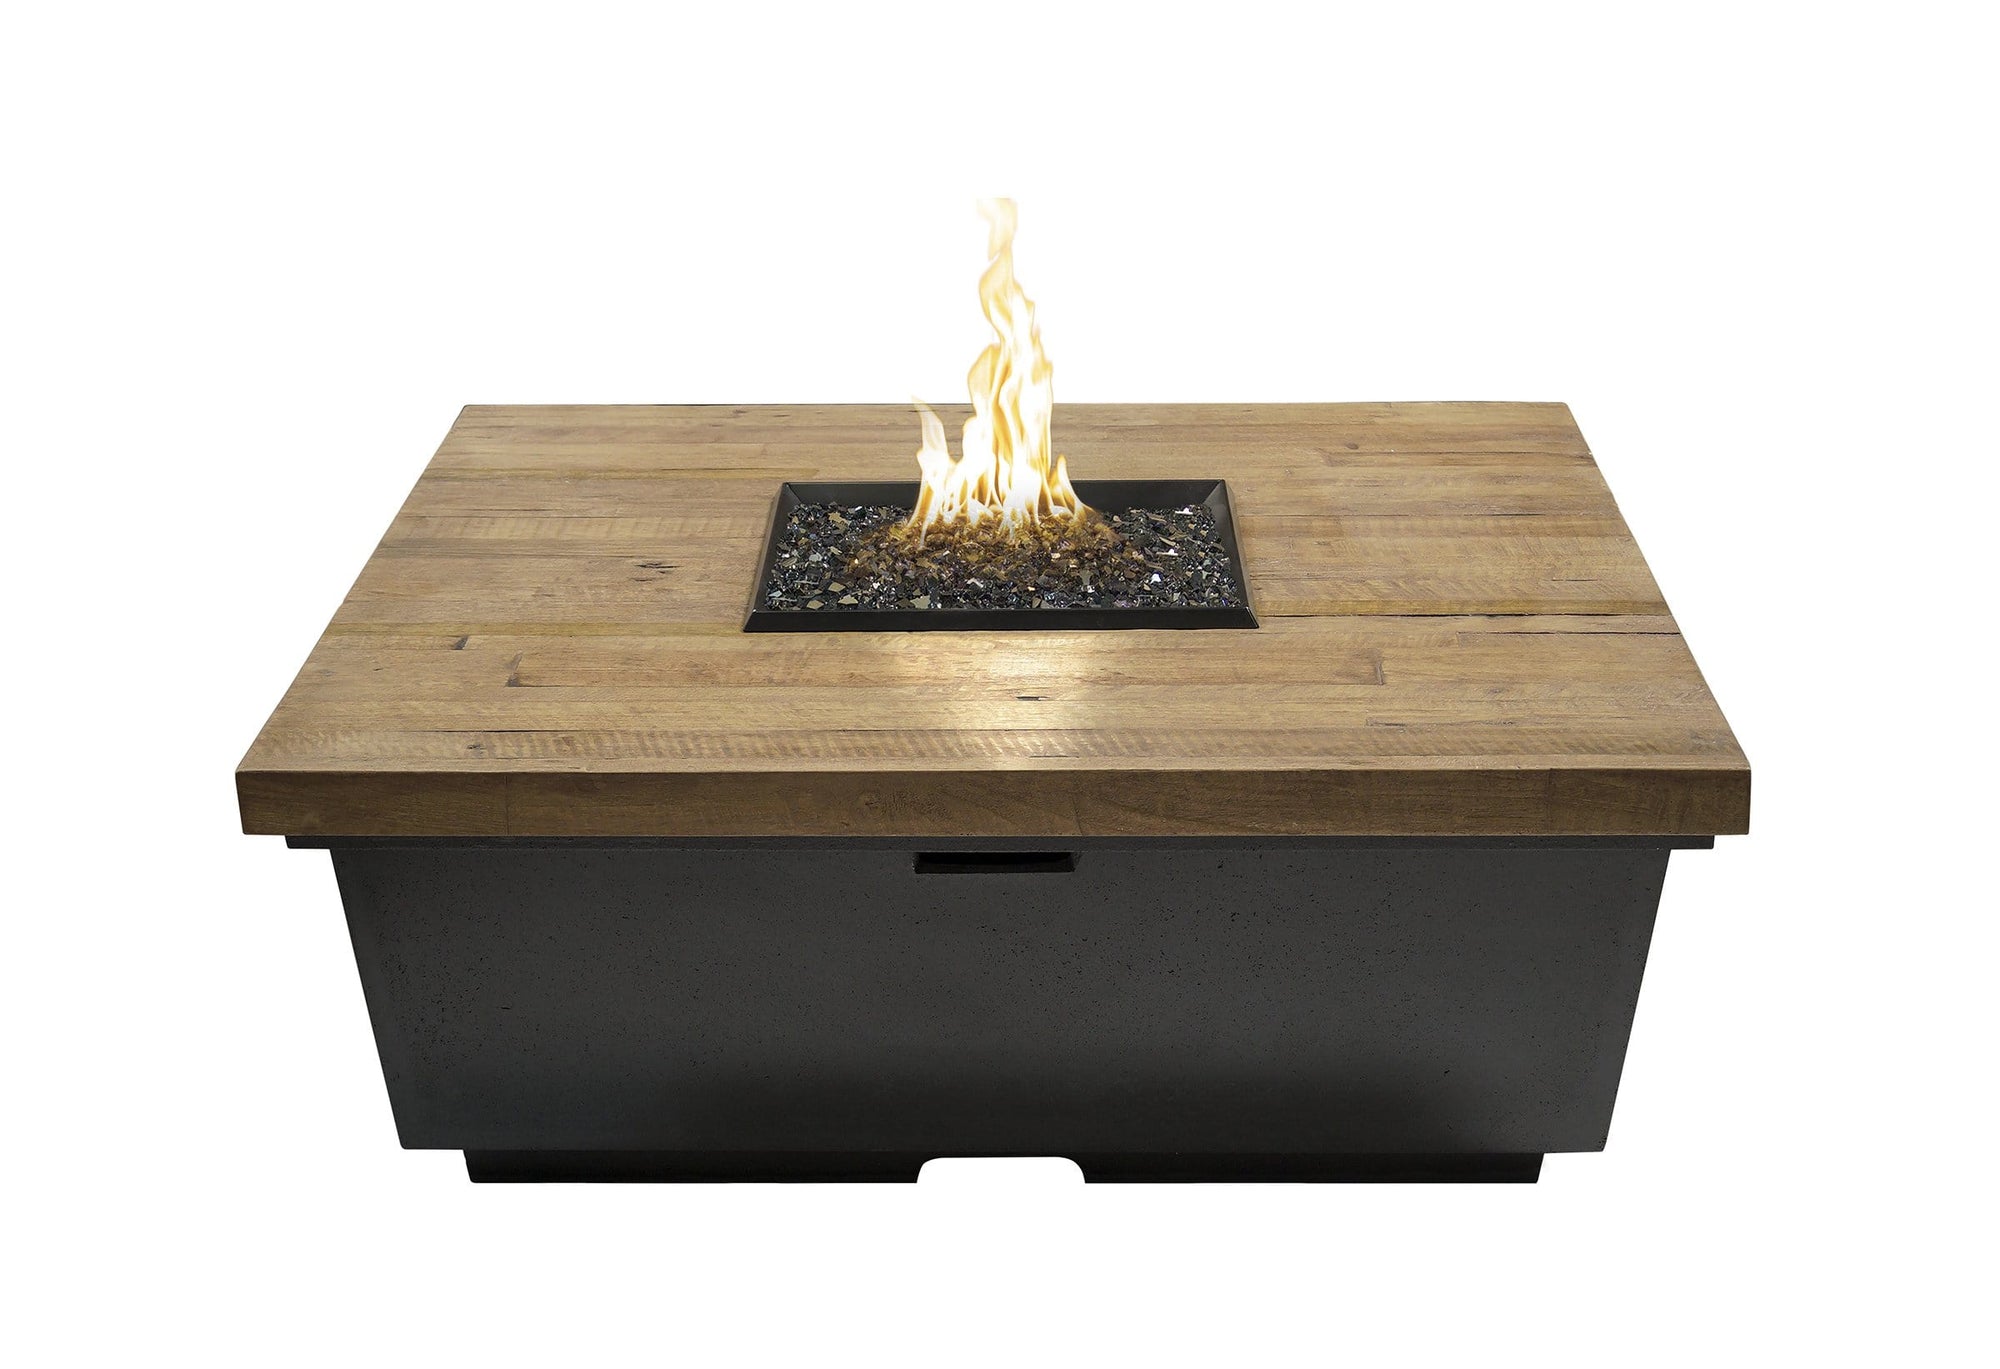 American Fyre Designs Fire Features French Barrel Oak / Natural Gas / Manual Ignition System American Fyre Designs 44" Reclaimed Wood Contempo Square Gas Firetable / French Barrel Oak or Silver Pine / 784-BA-FO-M2NC, 784-BA-FO-M2PC, 784-BA-SP-M2NC, 784-BA-SP-M2PC, 784-BA-FO-F2NC, 784-BA-FO-F2PC, 784-BA-SP-F2NC, or 784-BA-SP-F2PC